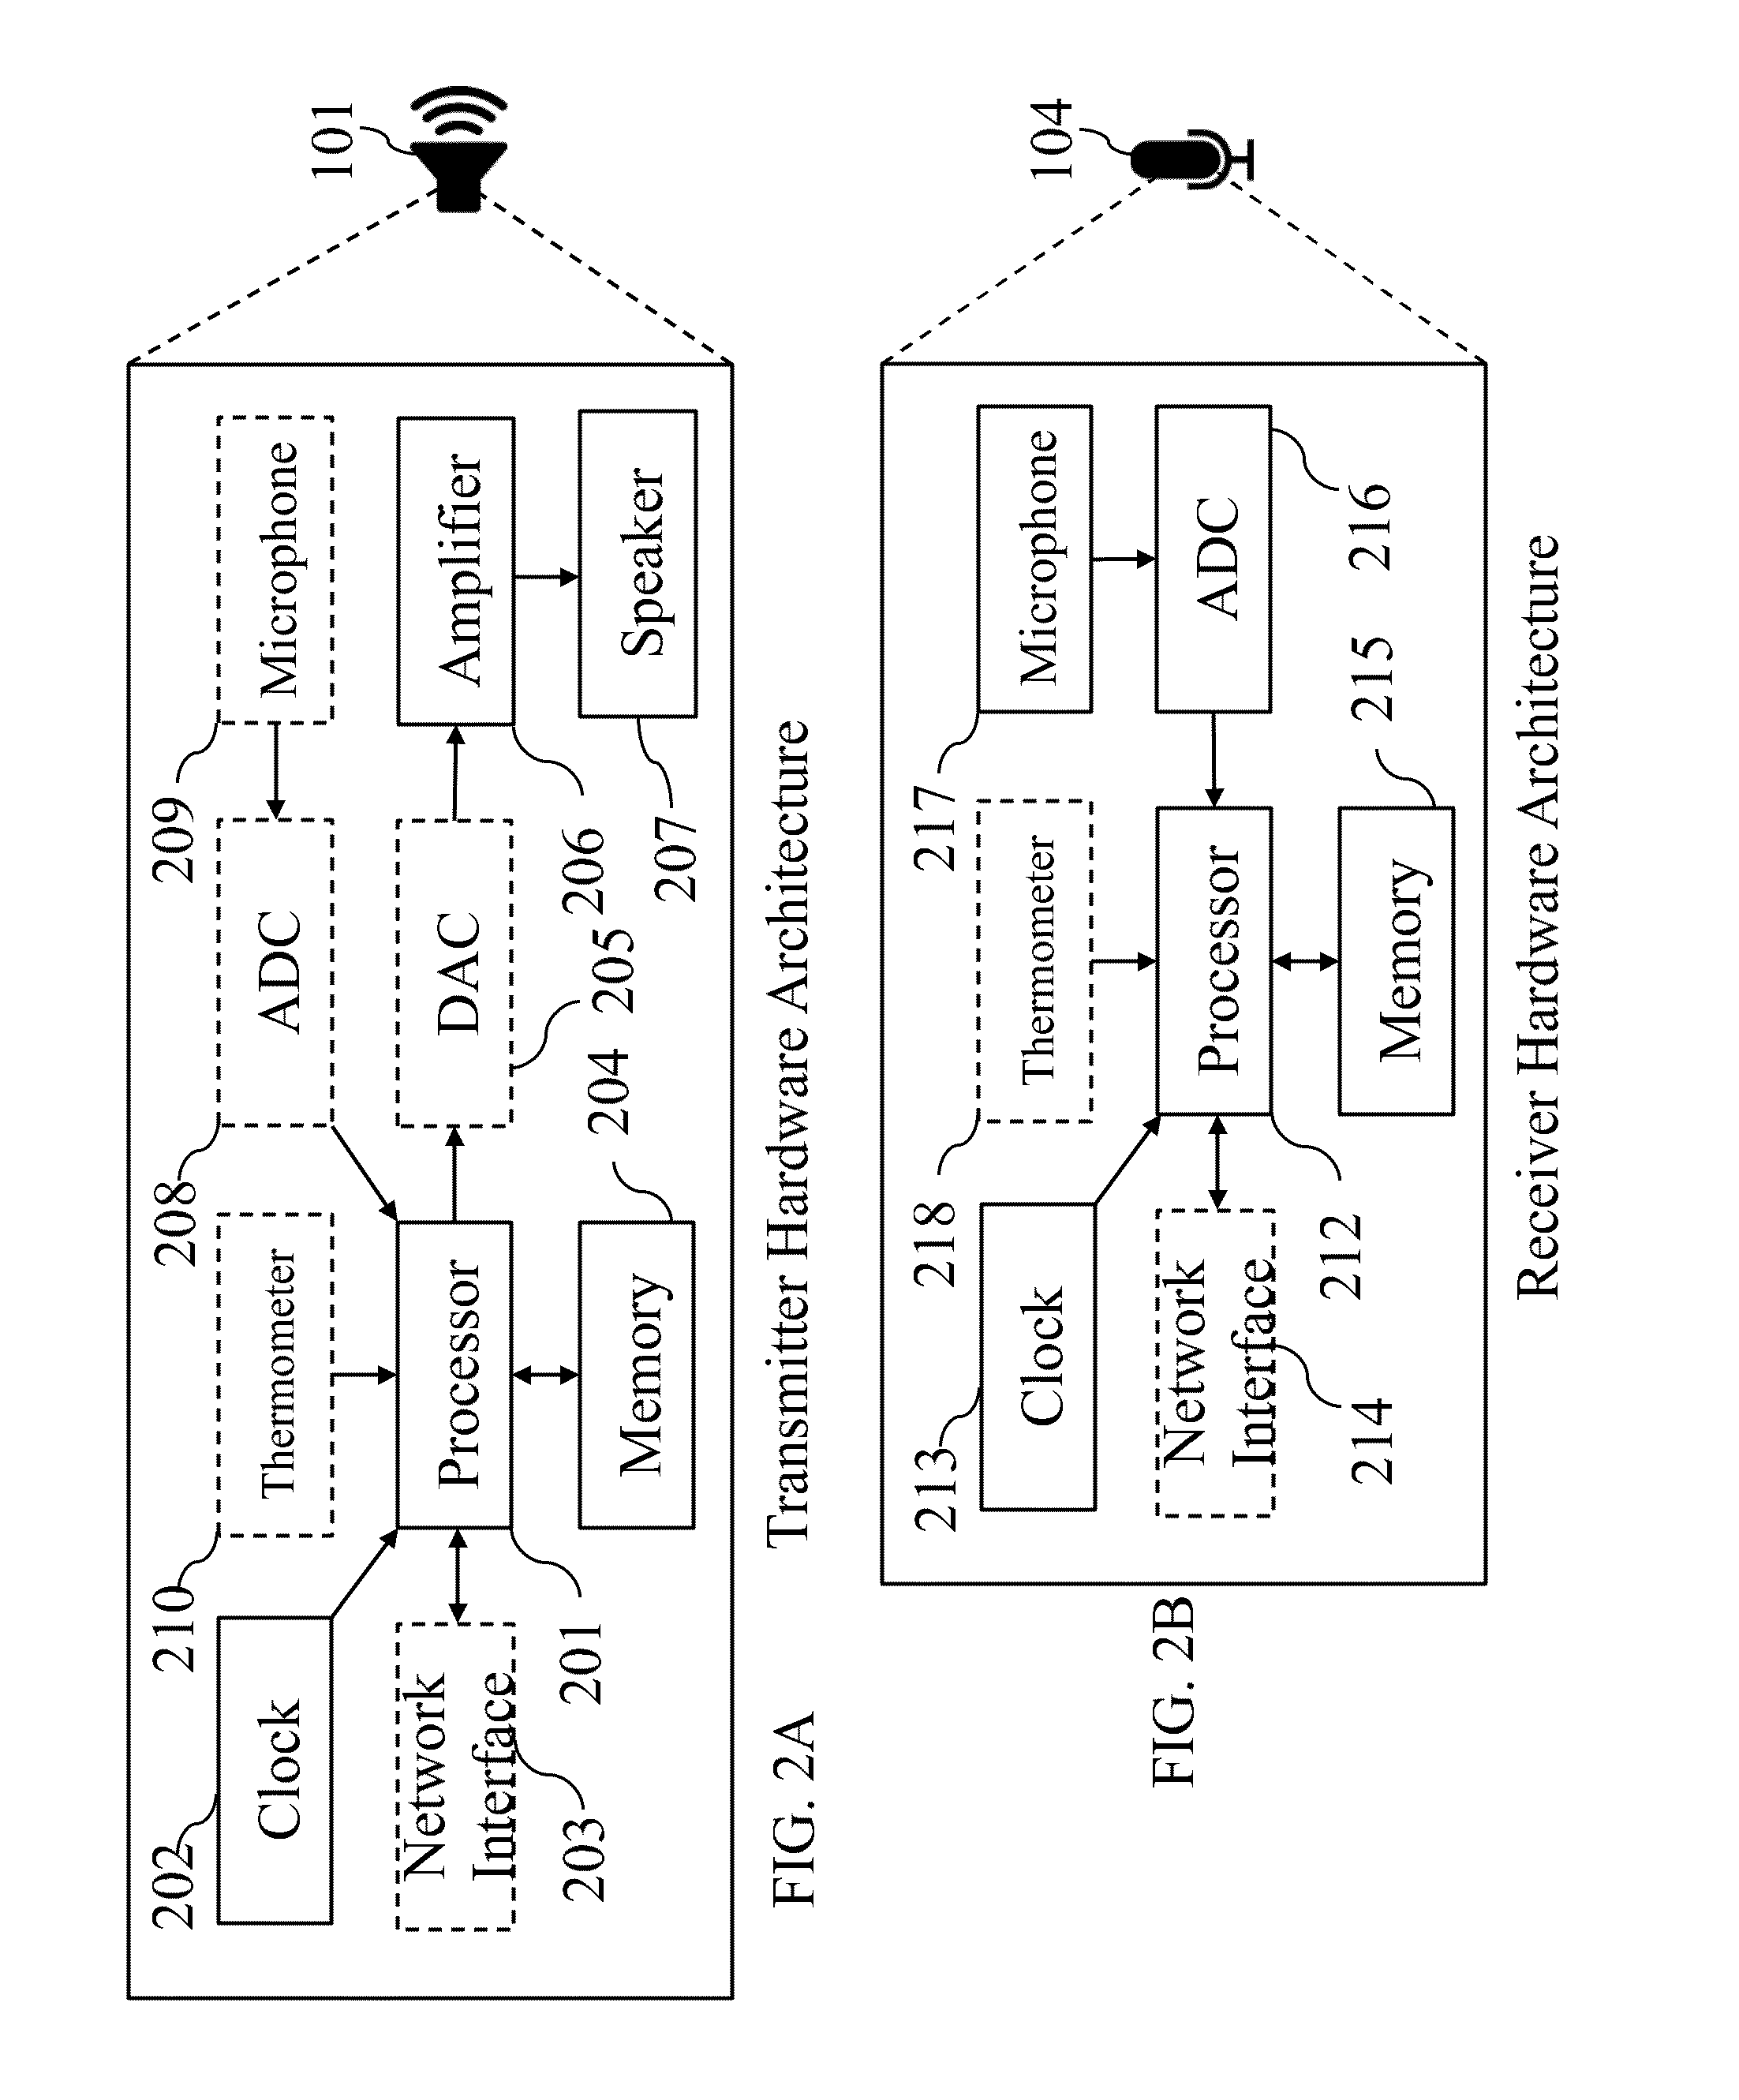 Method and System for Ultrasonic Signaling, Ranging and Location Tracking